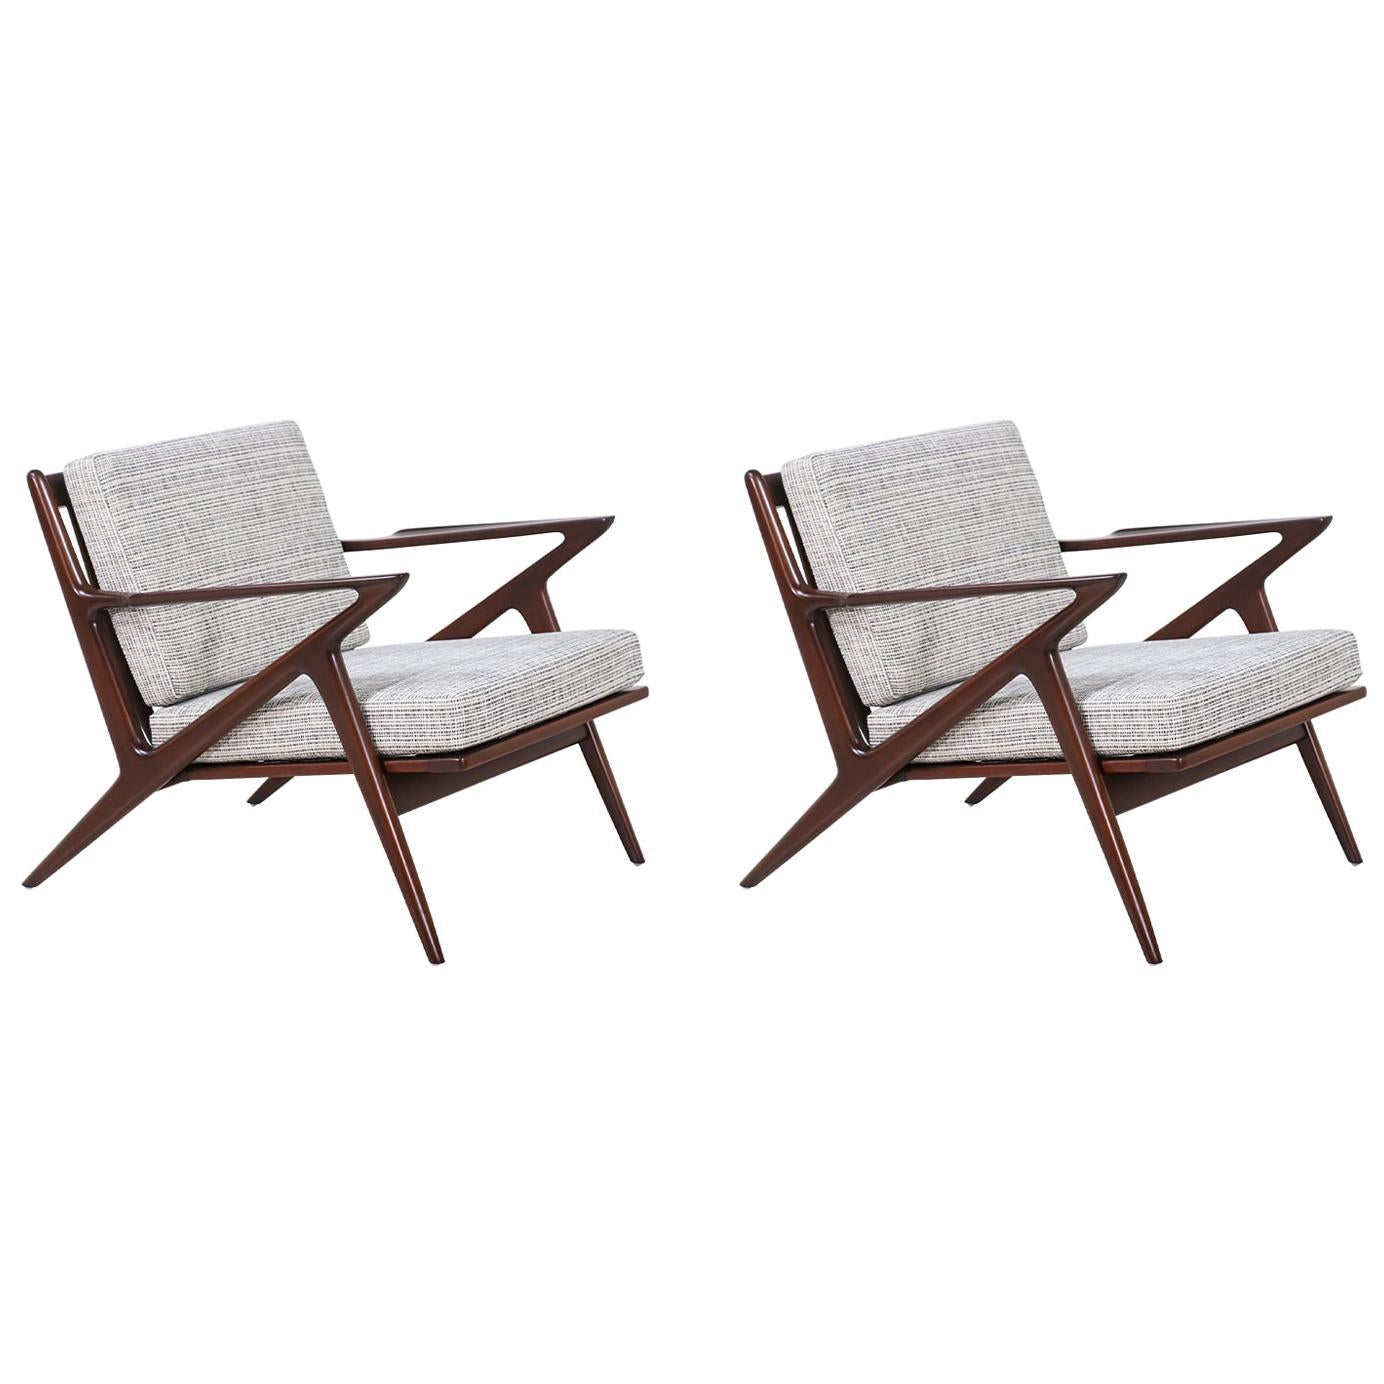 Mid-Century Modern "Z" Lounge Chairs by Poul Jensen for Selig